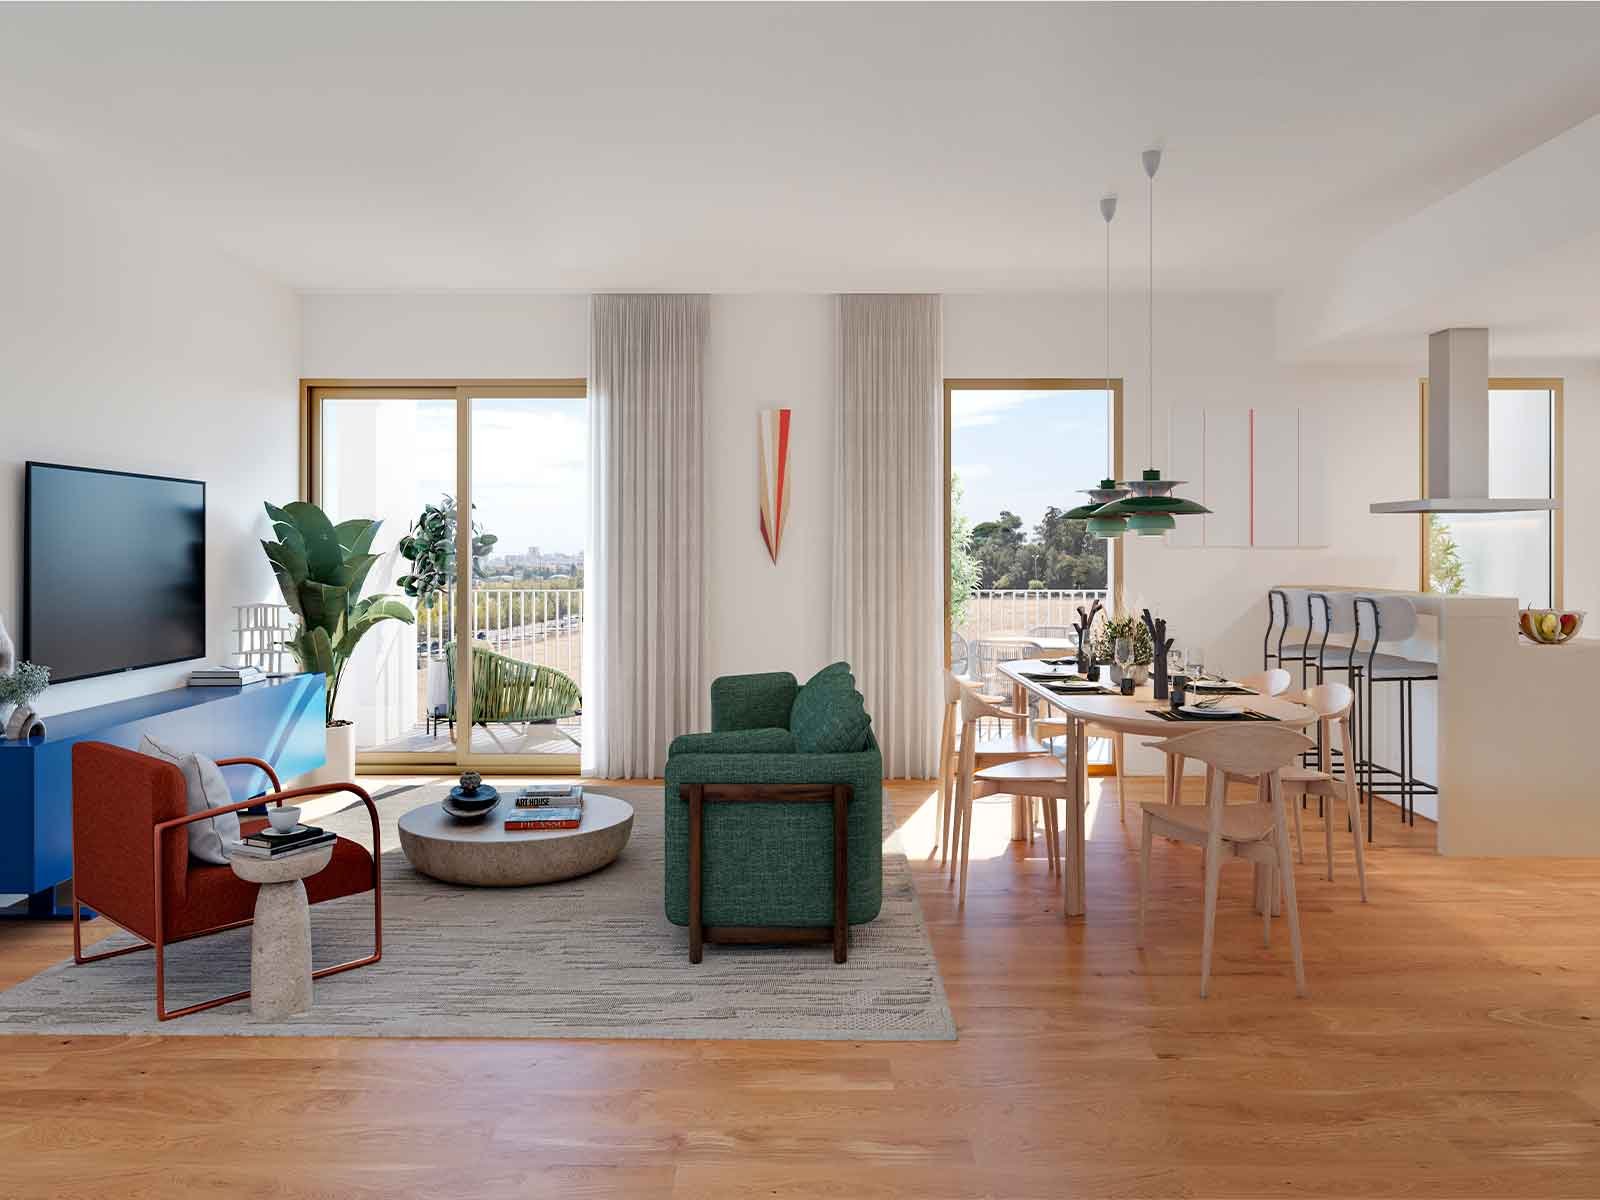 3 bedroom apartment with balcony and parking in new development, Lisbon 3258831438